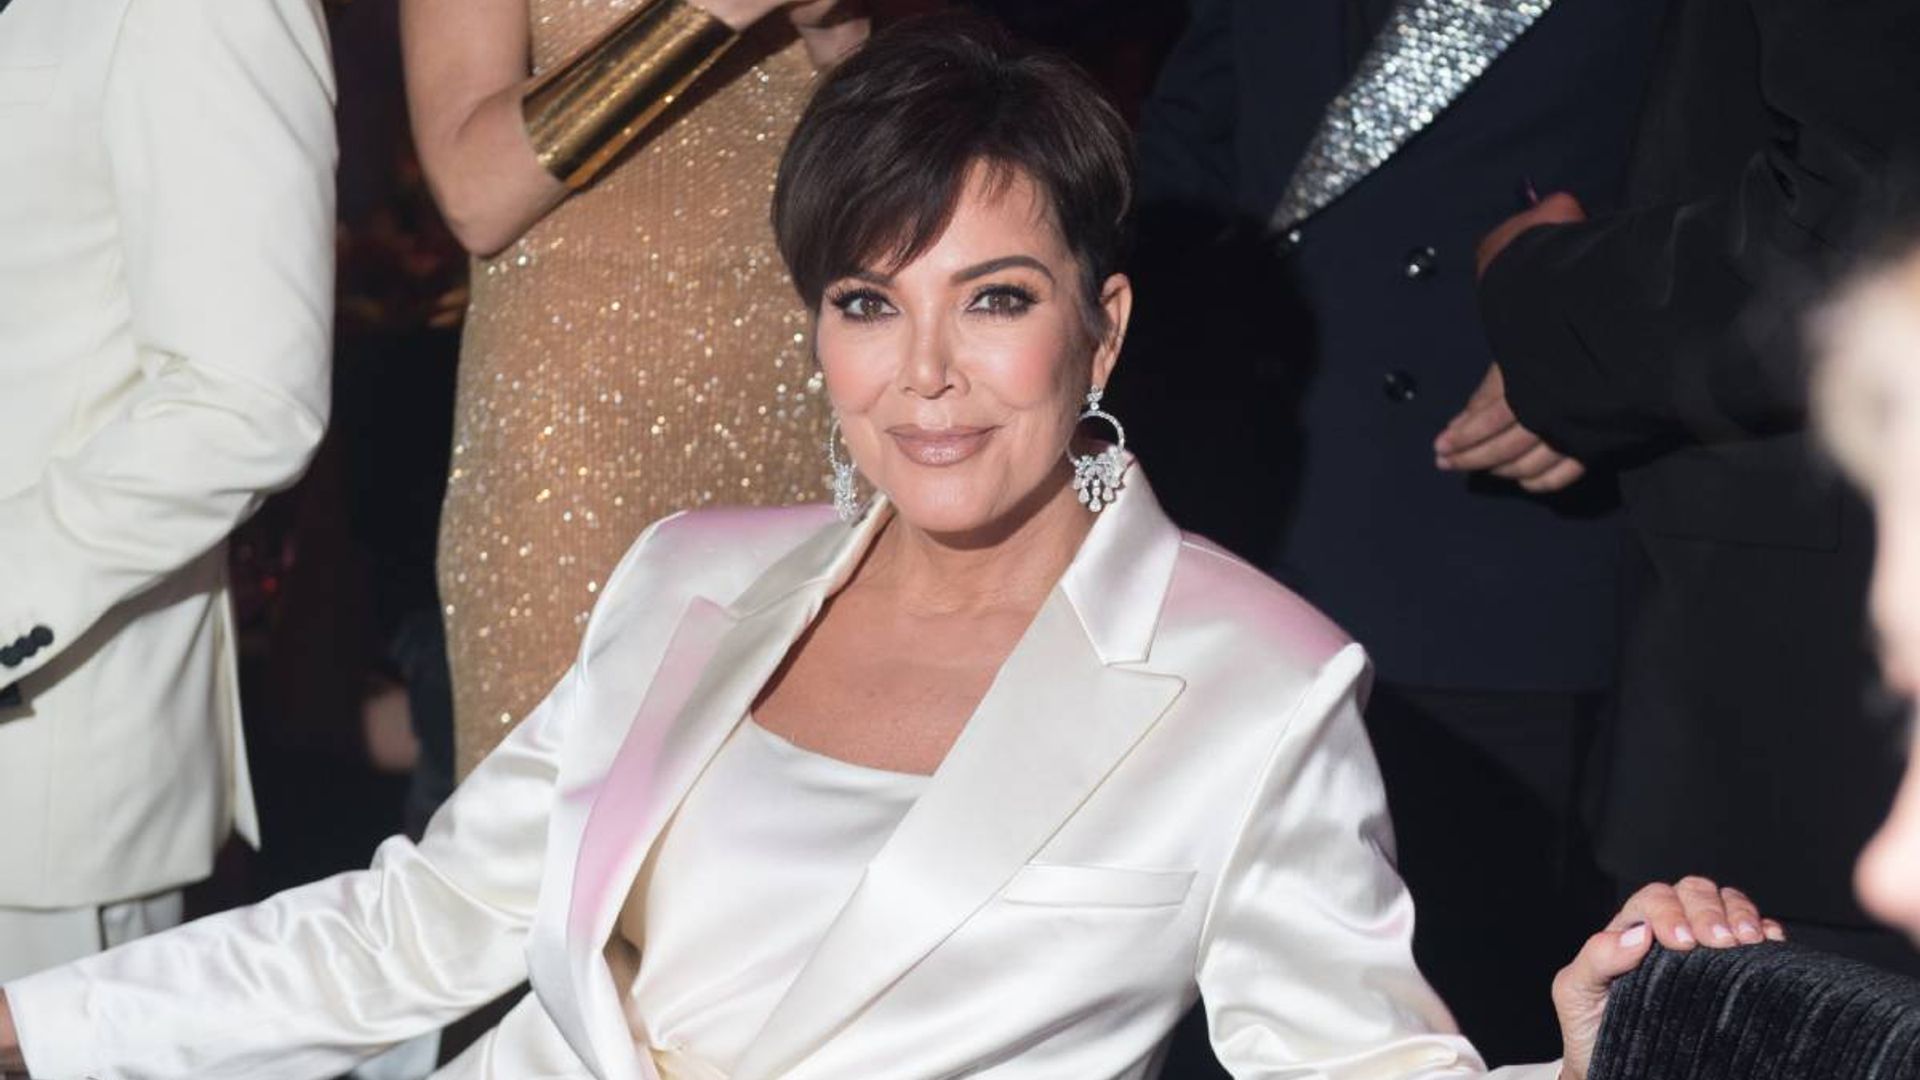 Kris Jenner reveals real reason family ended Keeping Up with the Kardashians